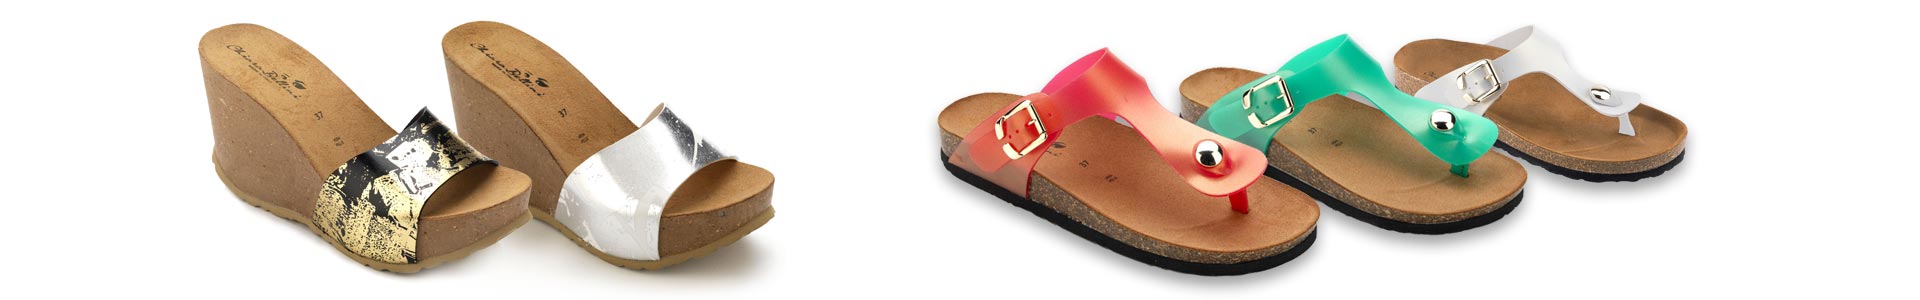 Sandals with cork sole today for sale in our on-line shop! 